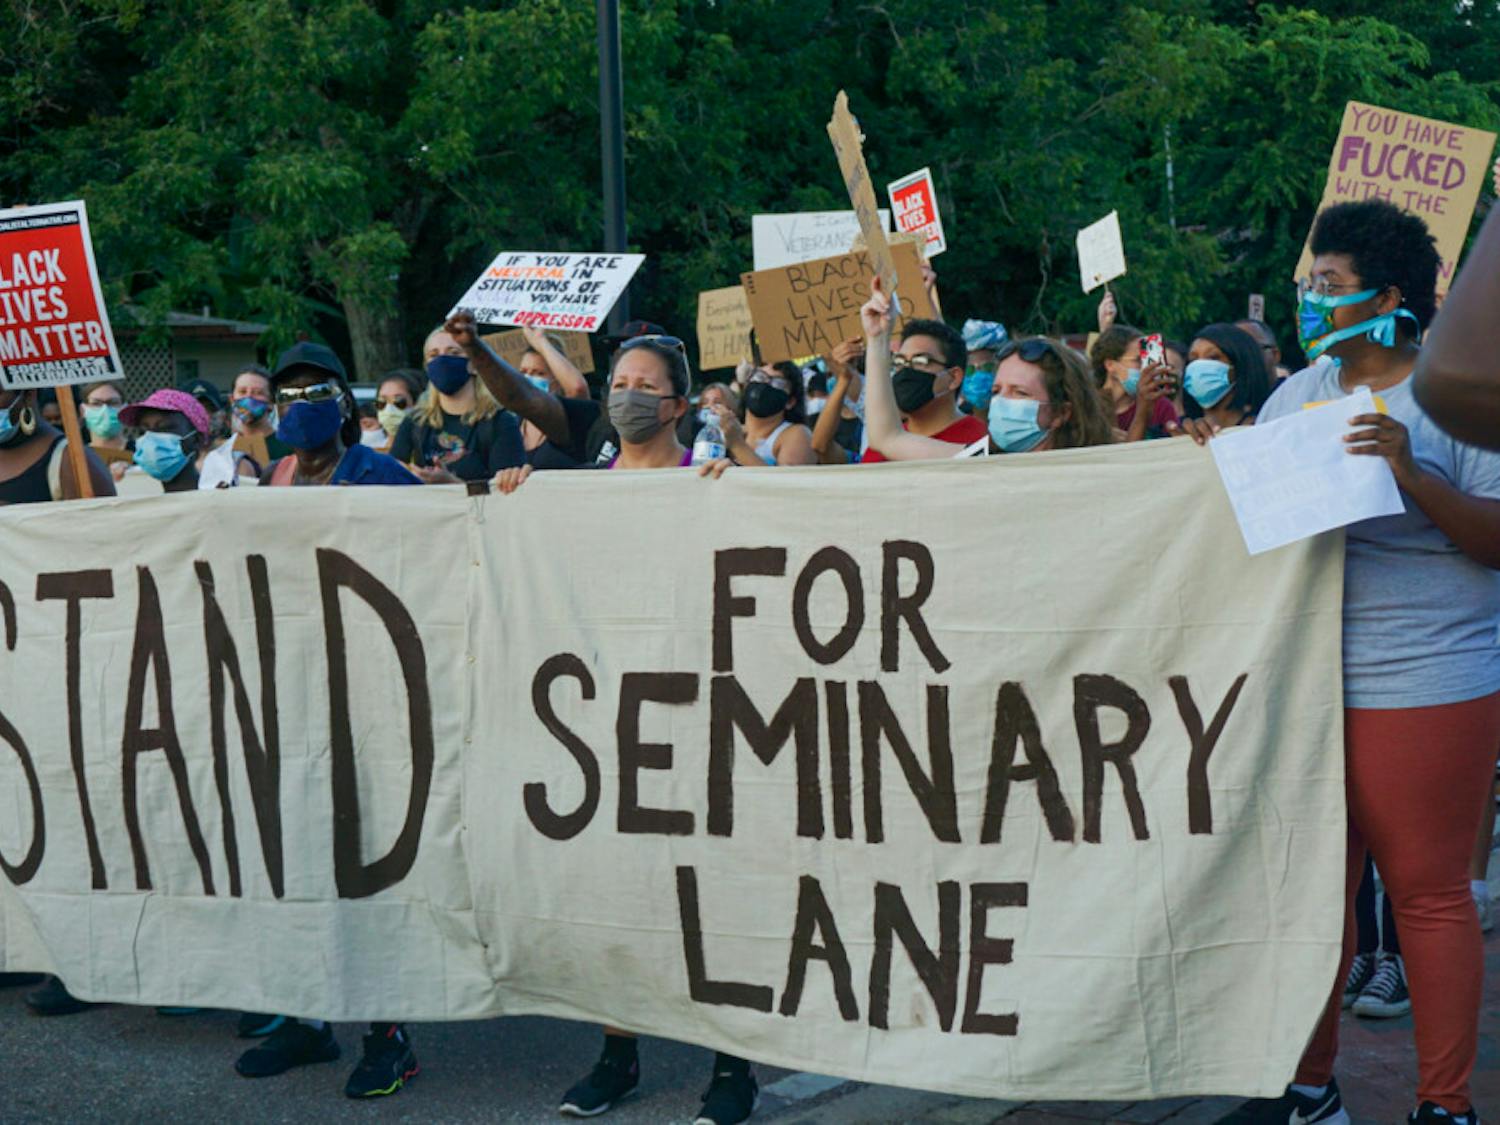 Protesters hold a banner that reads, "#StandForSeminaryLane," demanding that developers refrain from building luxury student apartments on land located in a historically Black community. 